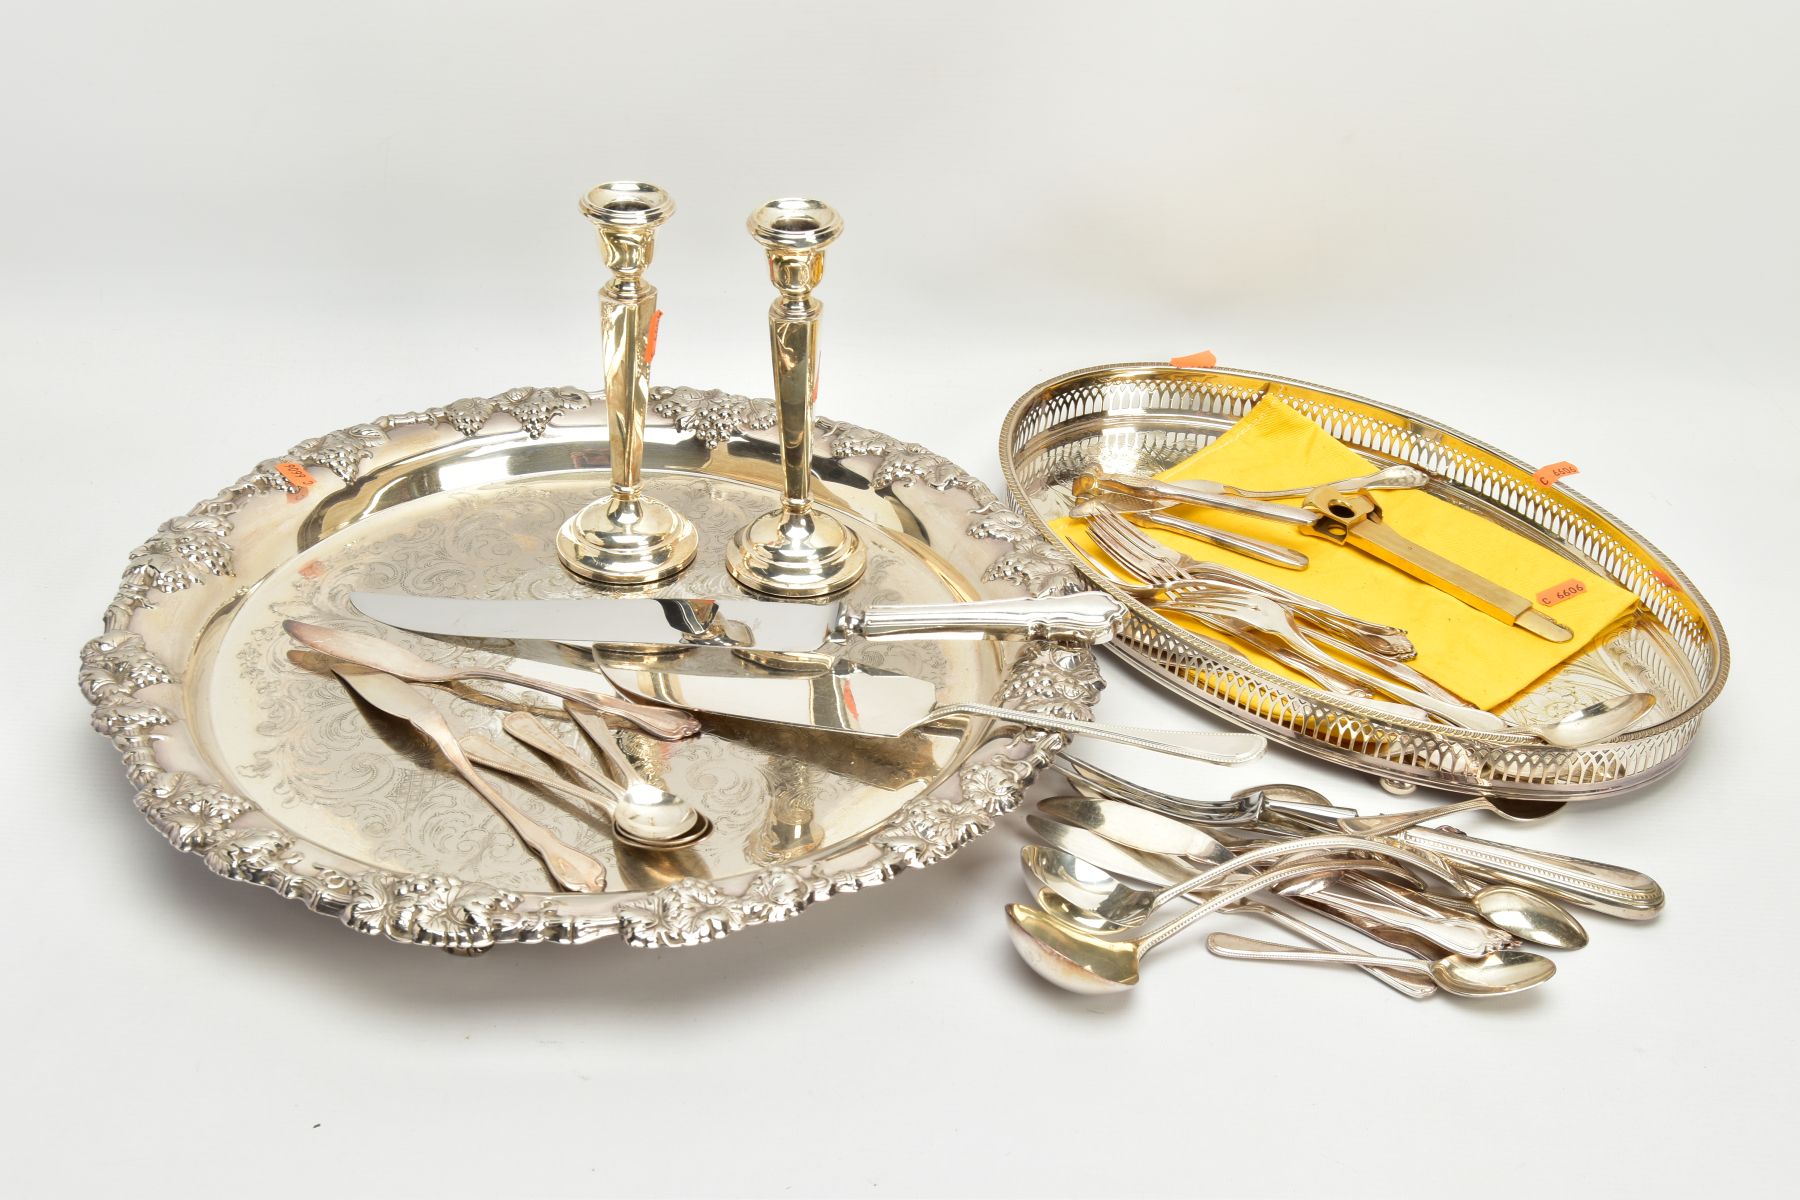 A PAIR OF SILVER CANDLESTICKS AND WHITE METAL WARE, the pair of silver candle sticks with tapered